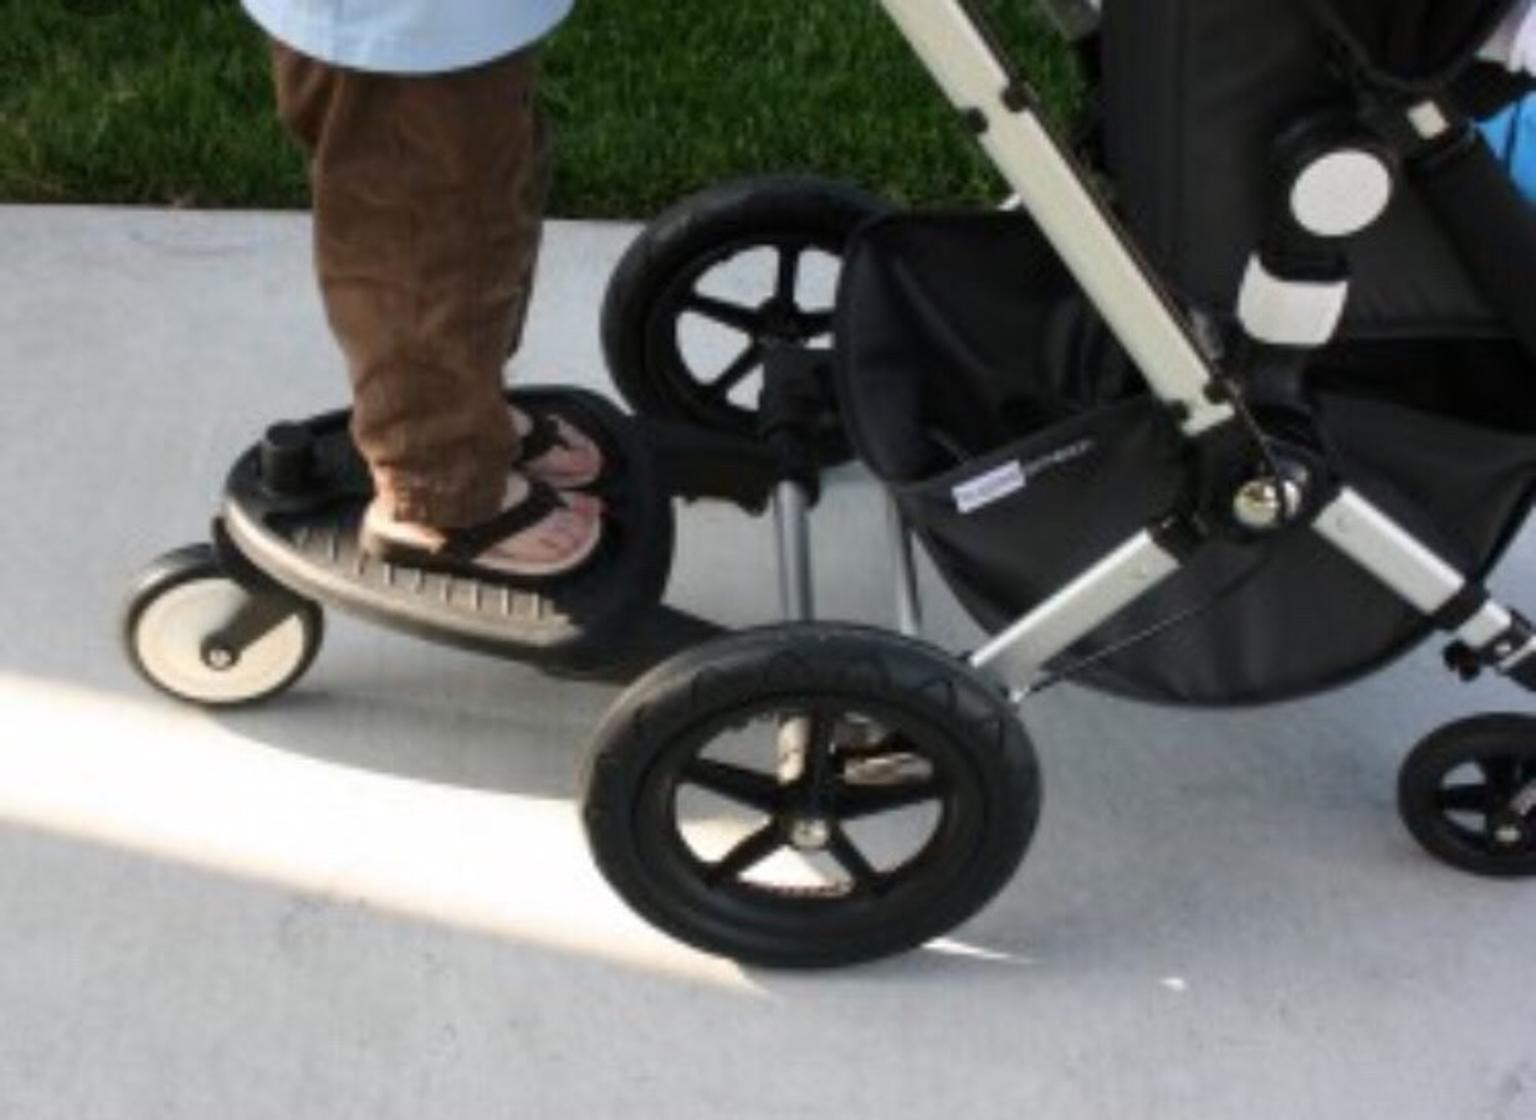 bugaboo buggy board with seat